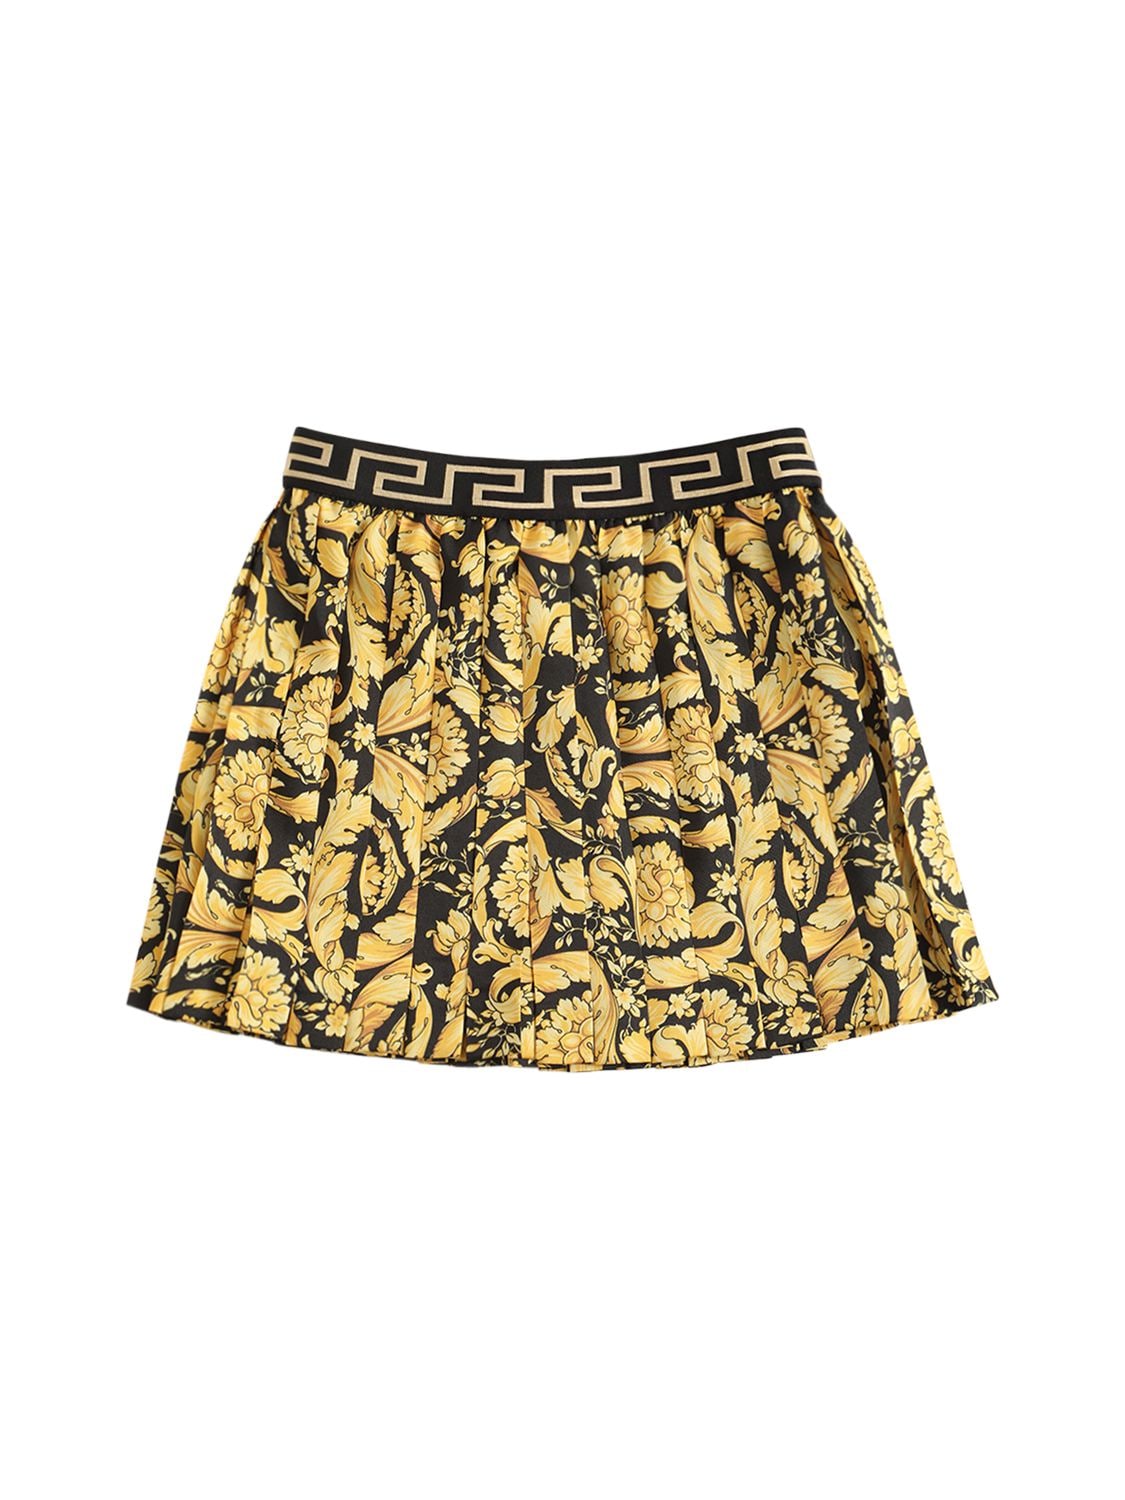 Image of Barocco Print Pleated Twill Skirt